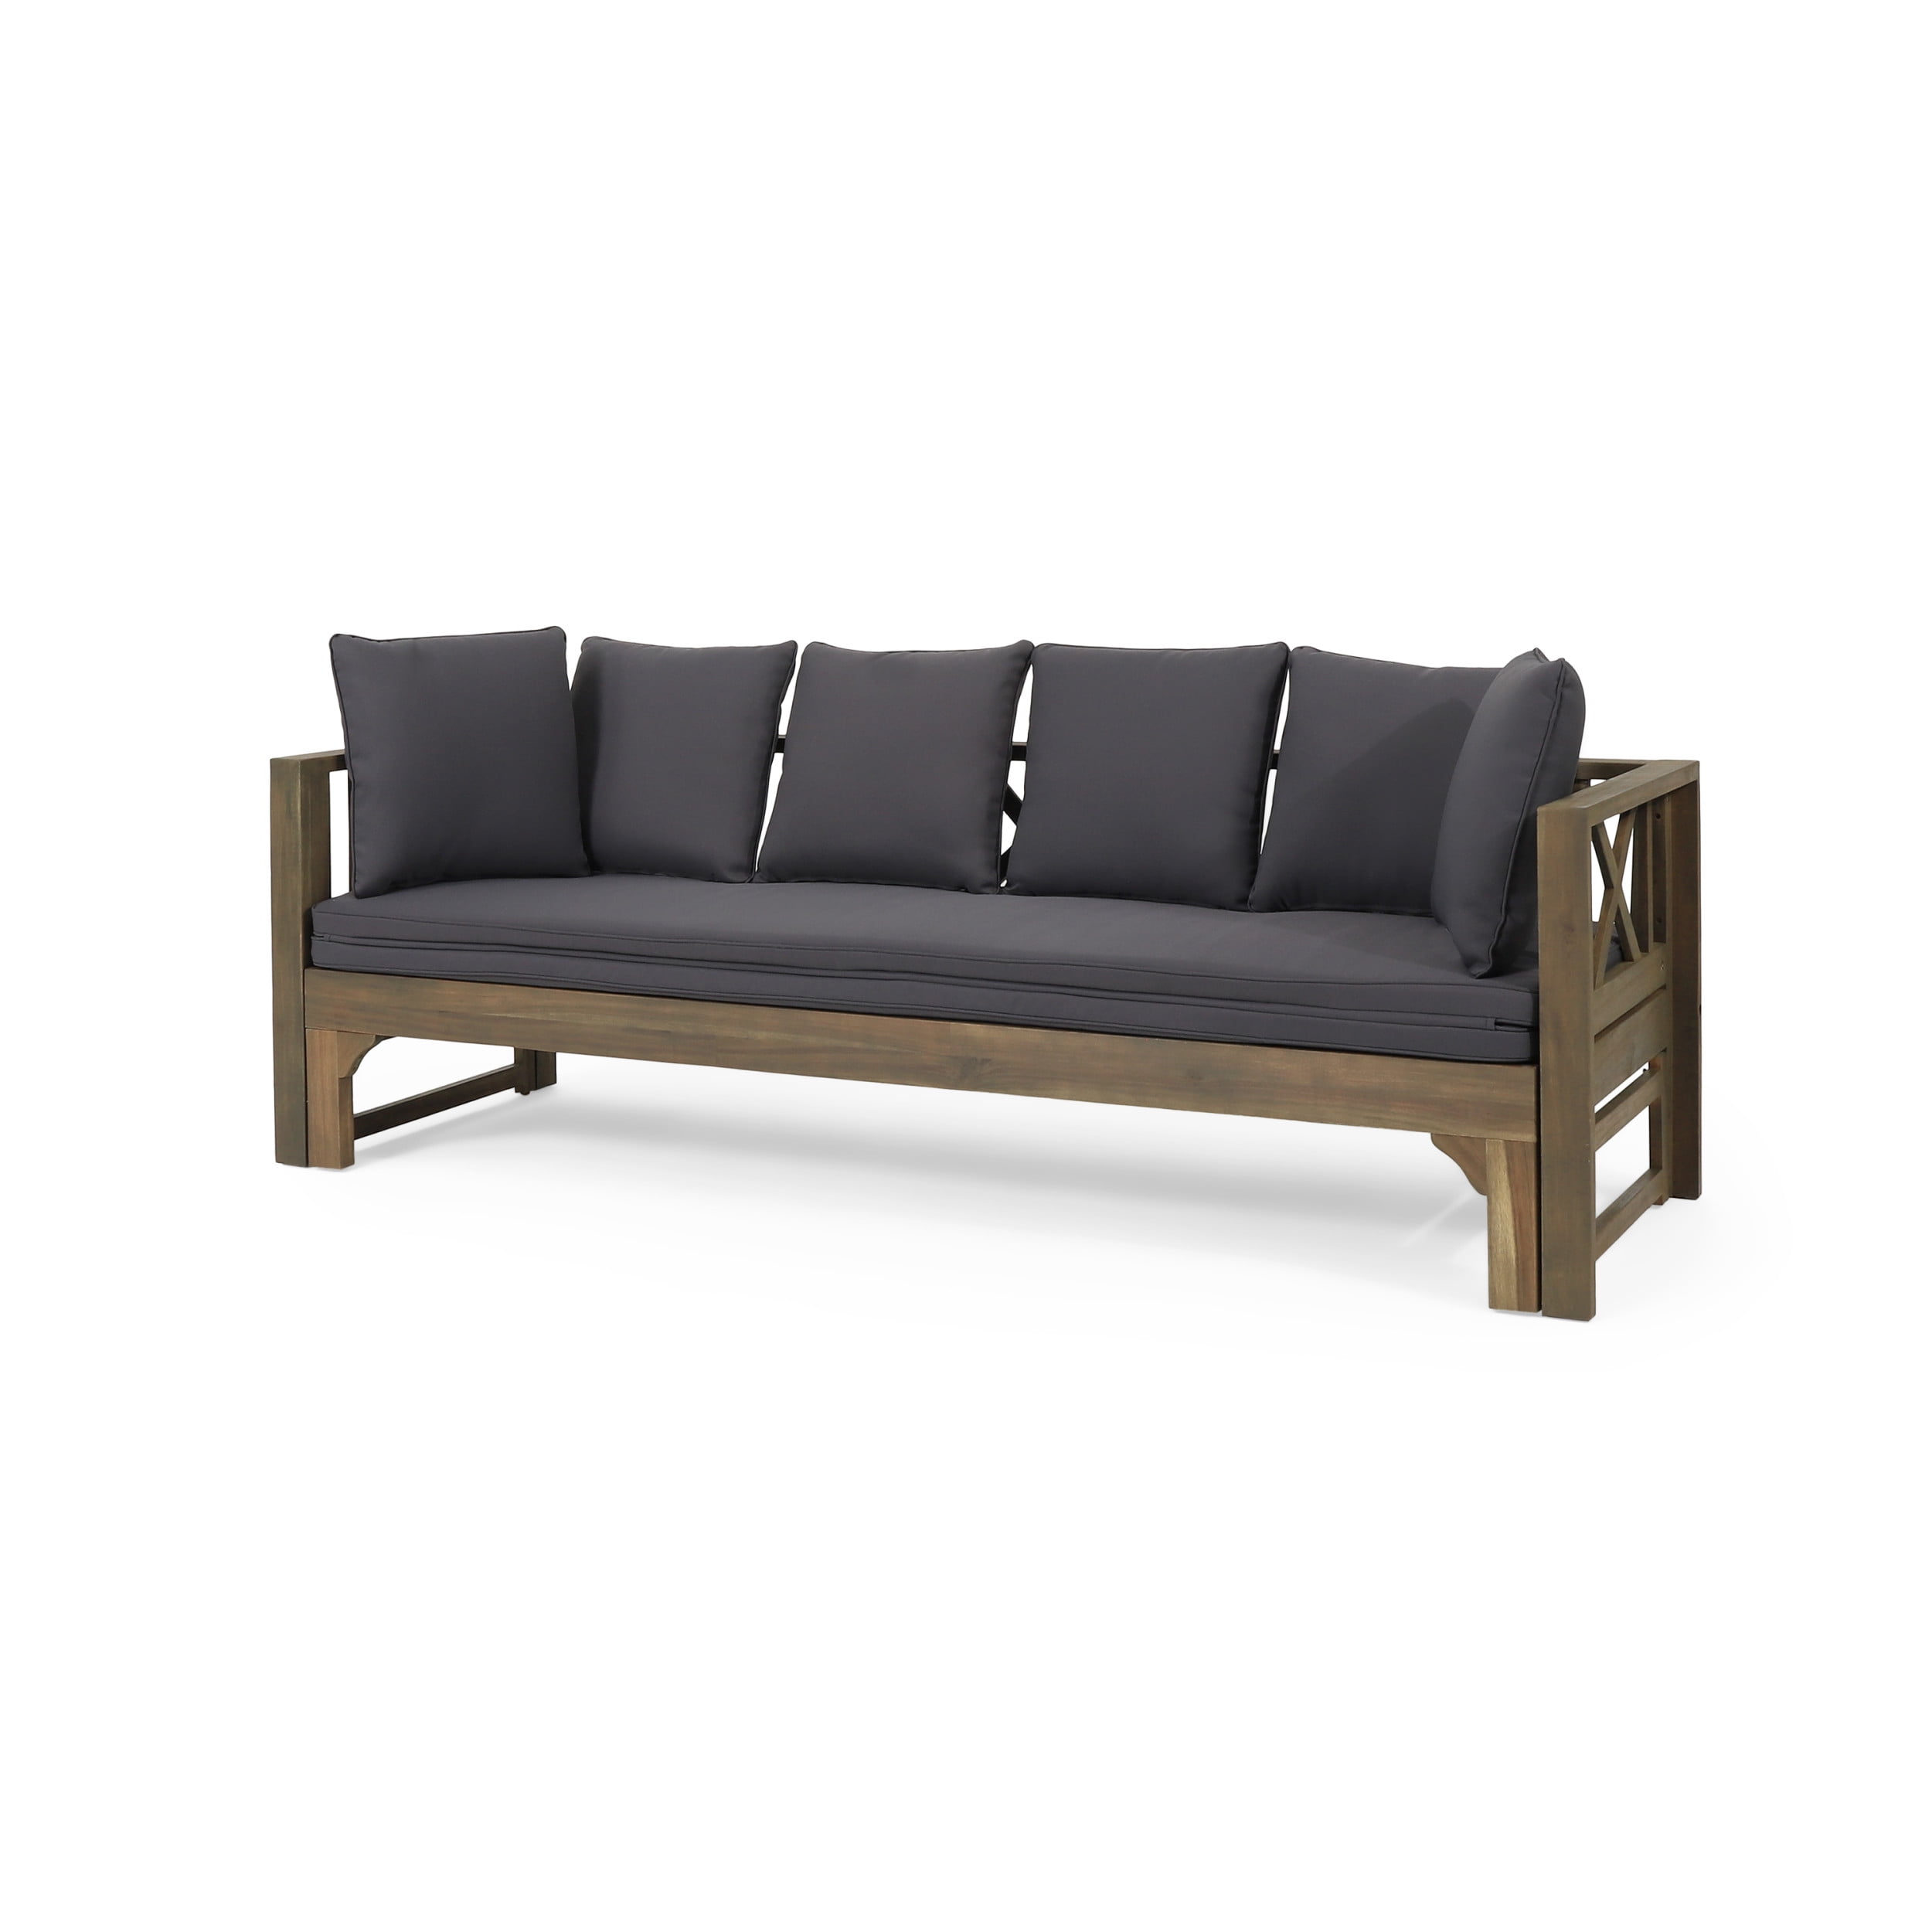 GDF Studio Camille Outdoor Sofa, Extendable Teal Daybed Wood Dark Teak and Acacia